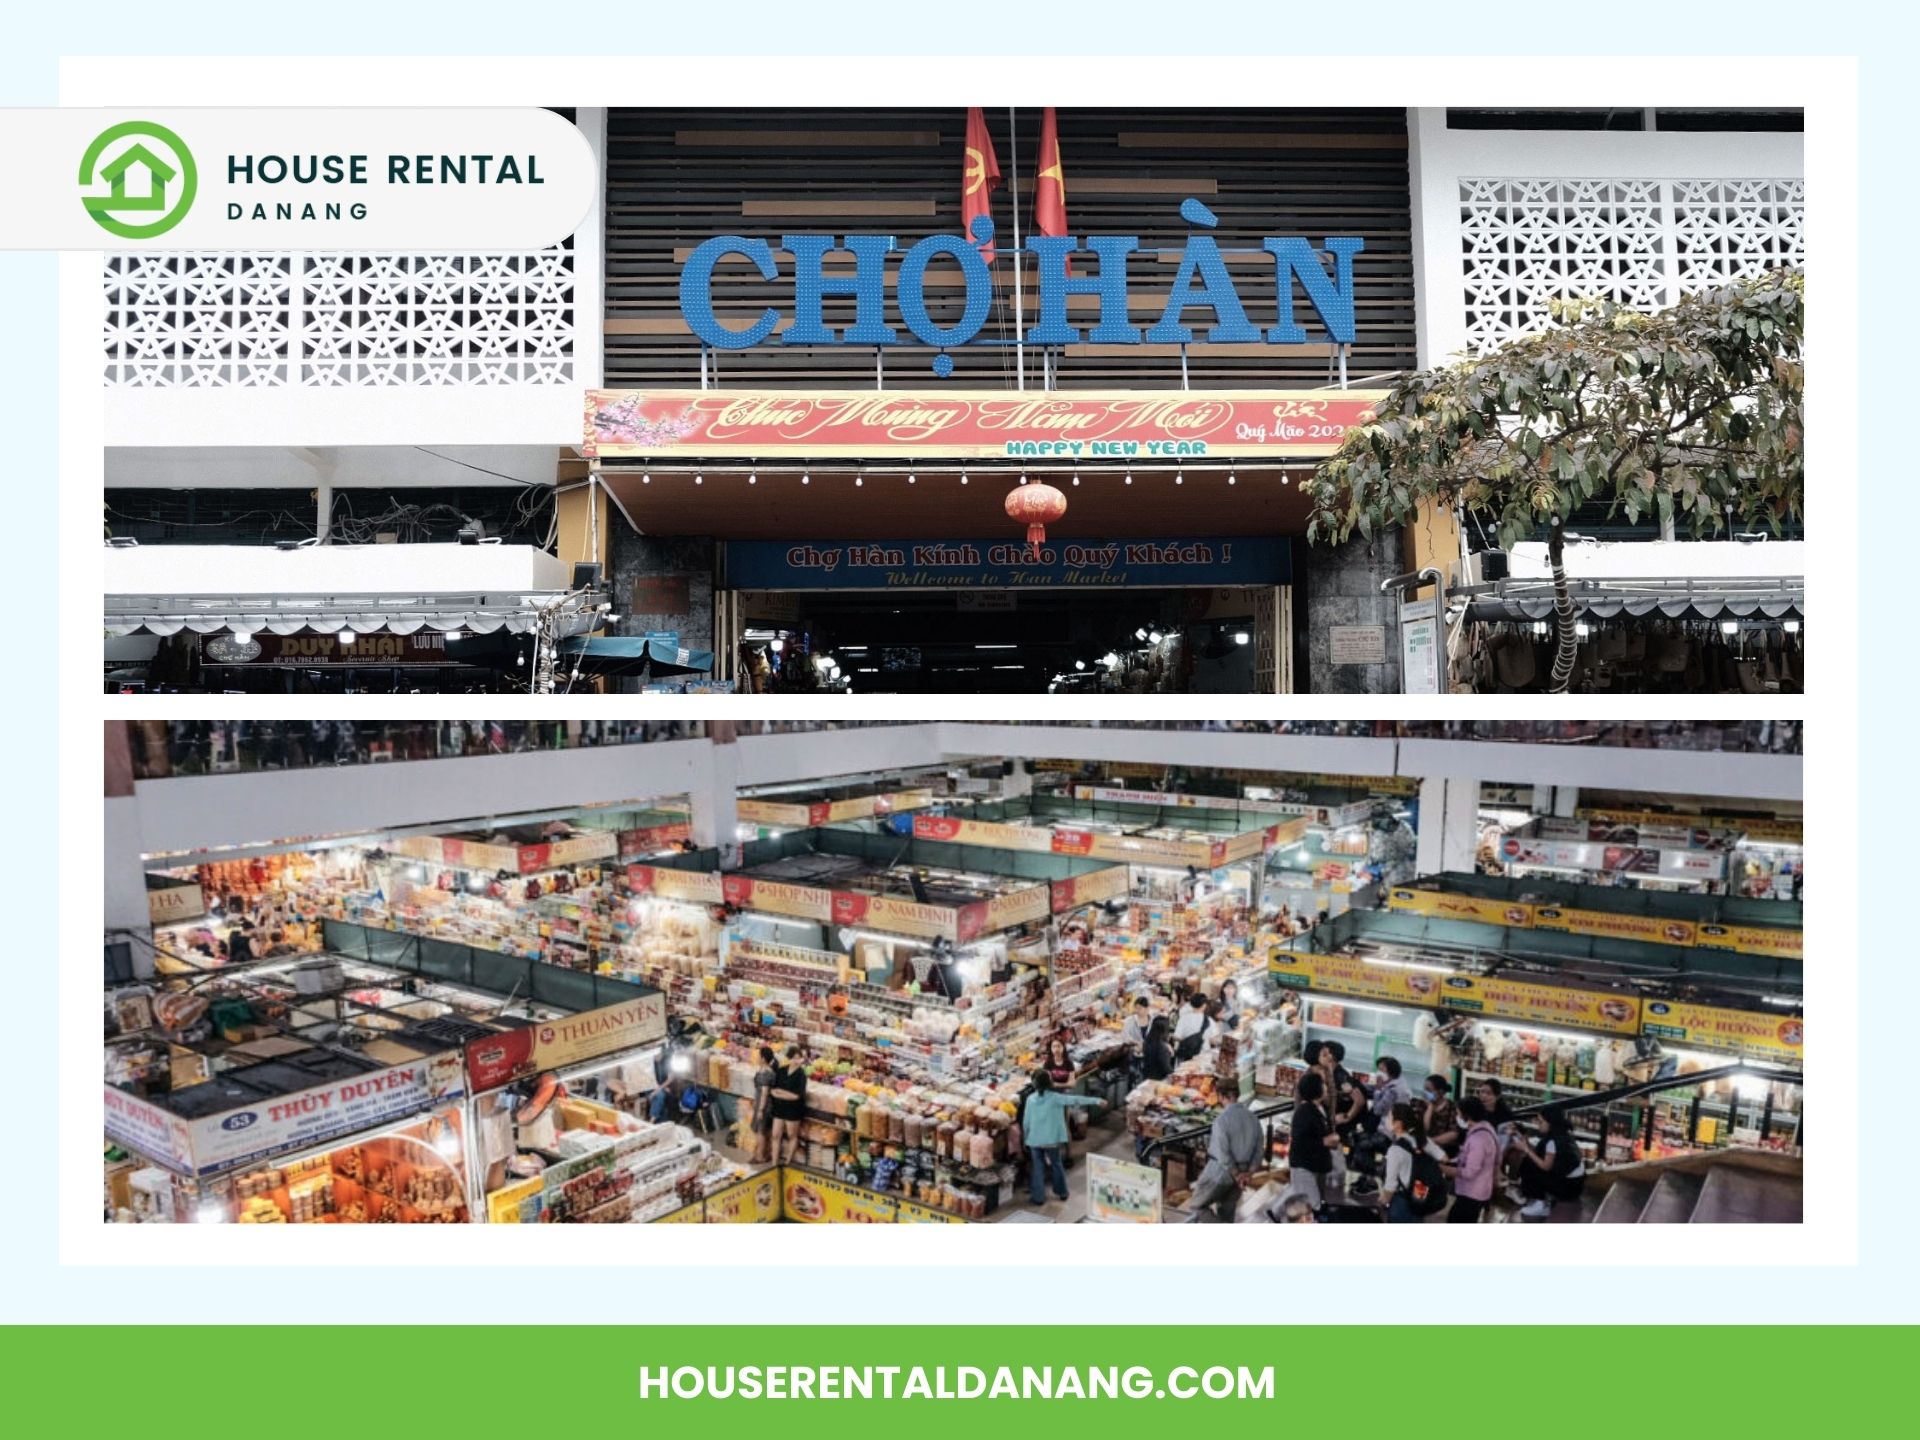 Exterior and interior views of Chợ Hàn market in Danang, one of the best places to visit in Da Nang, displaying the entrance and various stalls inside.